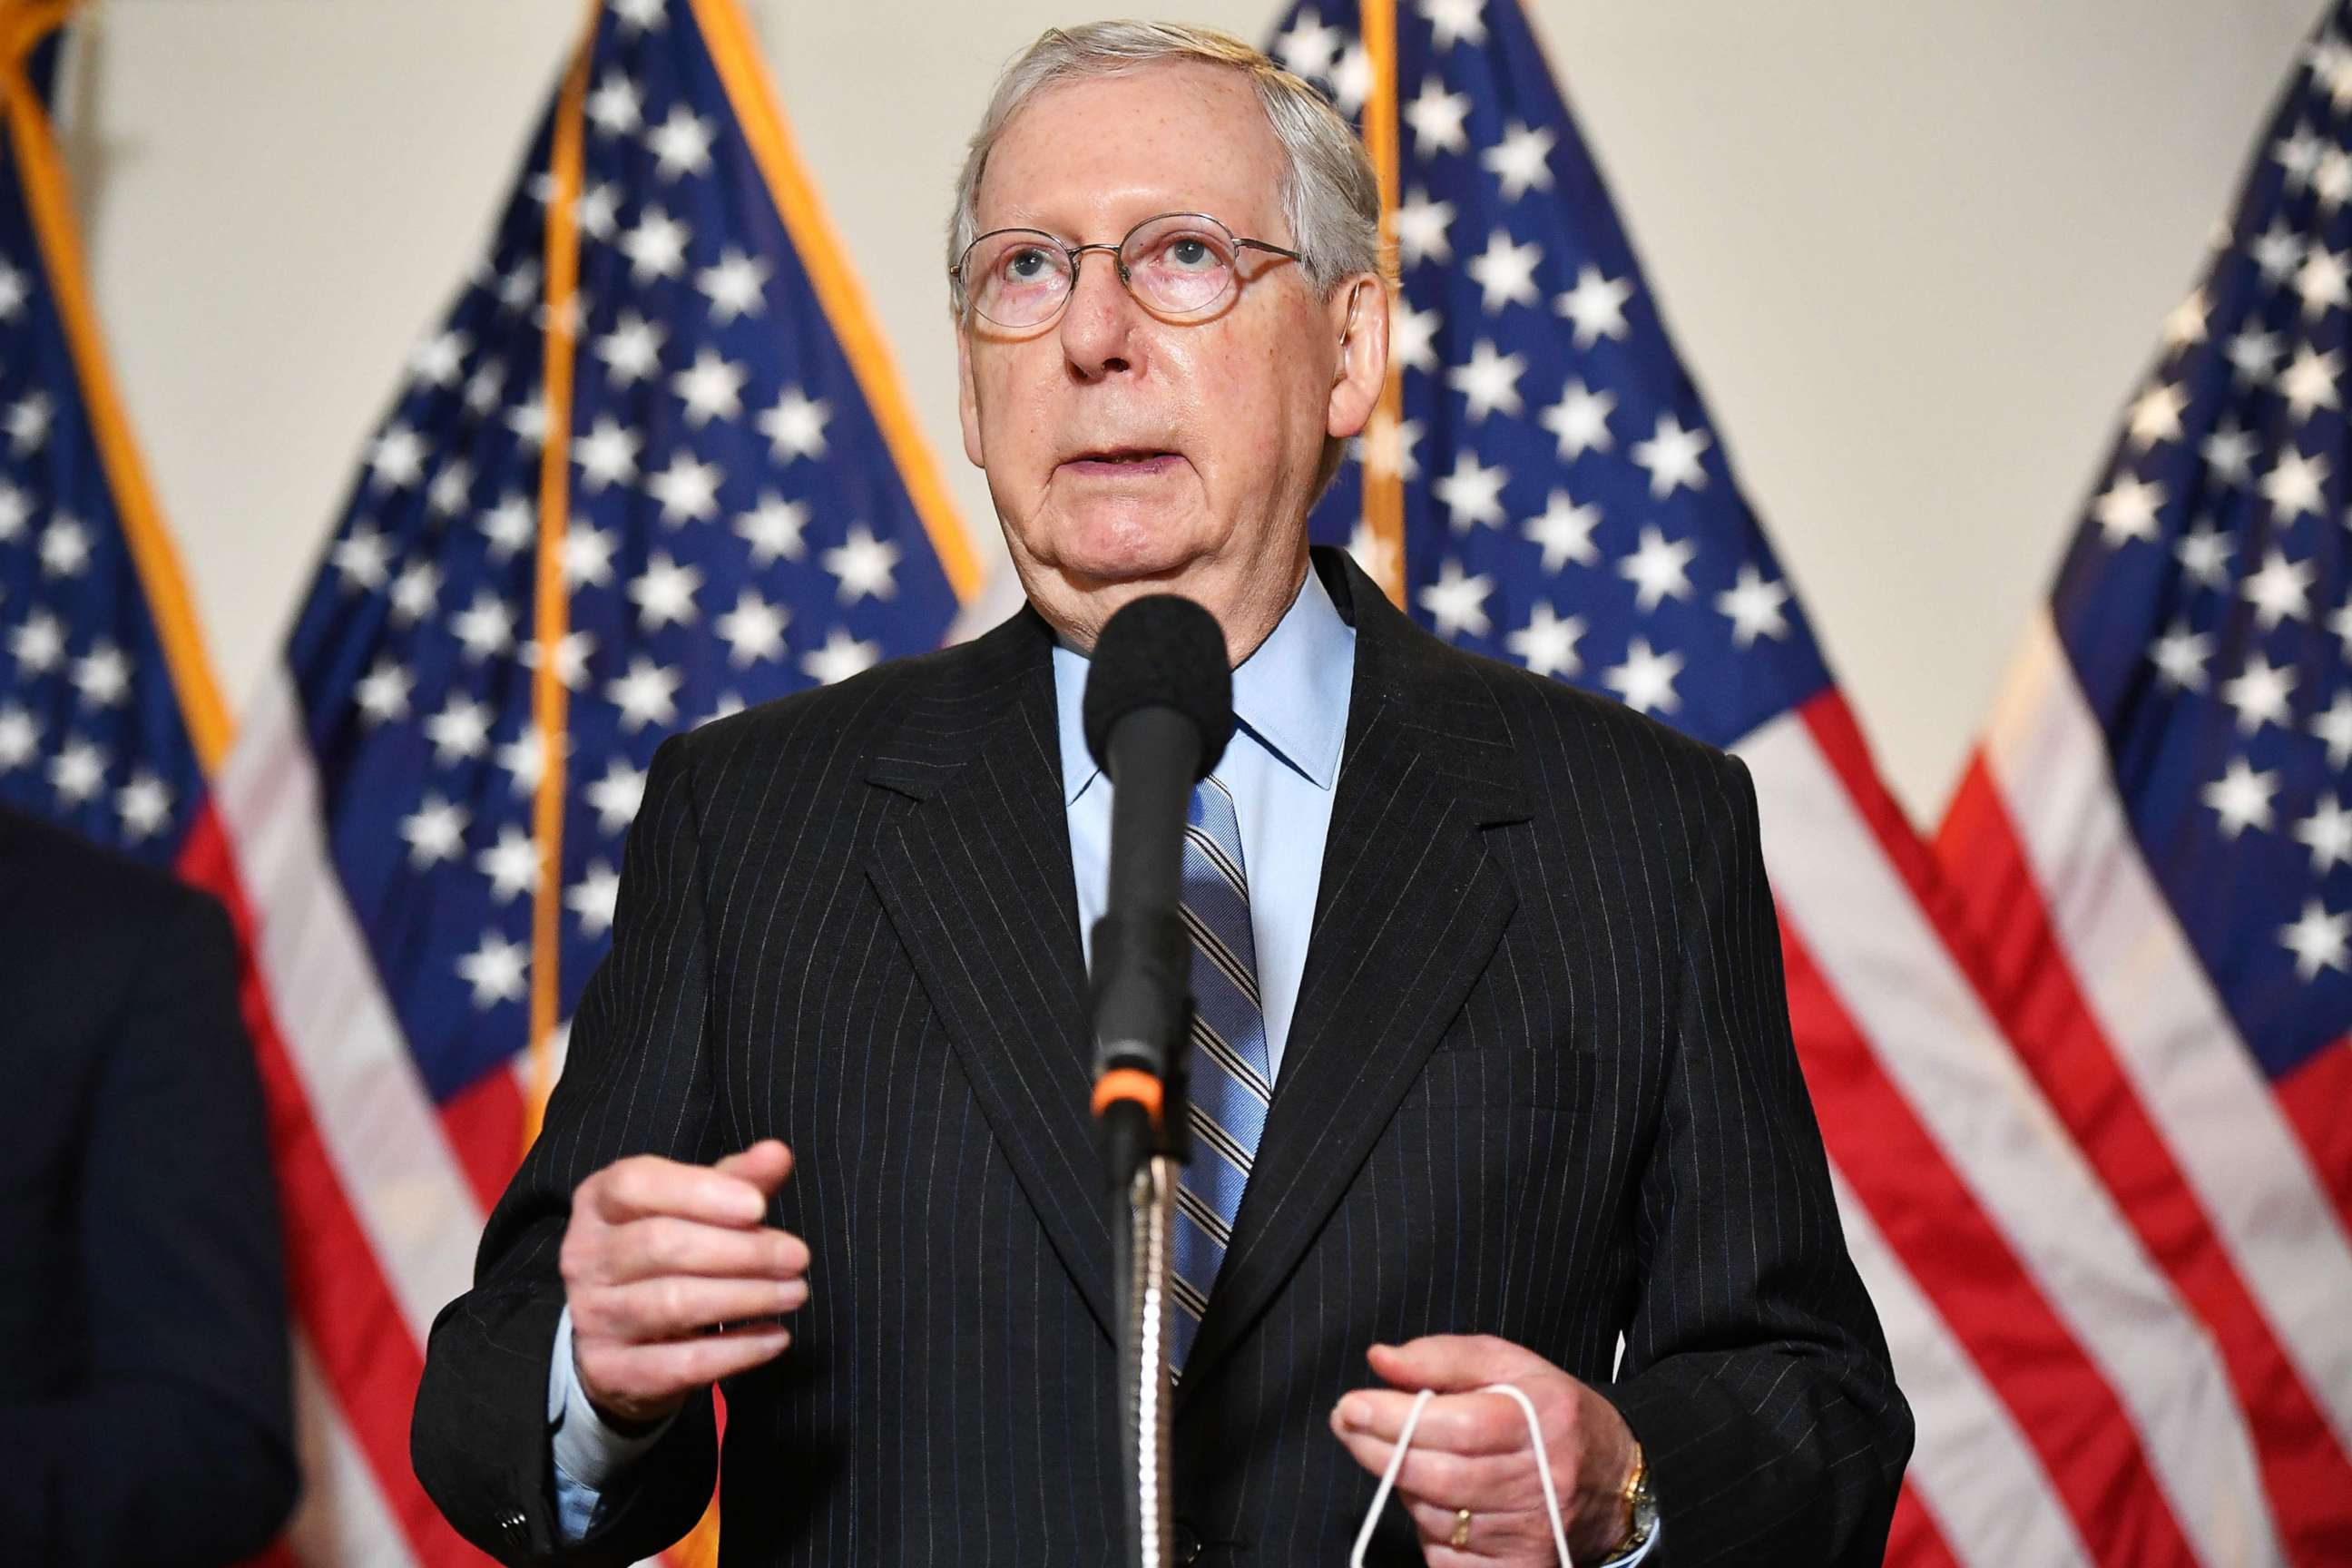 PHOTO: In this Aug. 4, 2020, file photo, Senate Majority Leader Mitch McConnell speaks after attending the Senate Republican luncheon at the Hart Senate Office Building on Capitol Hill  in Washington, DC.